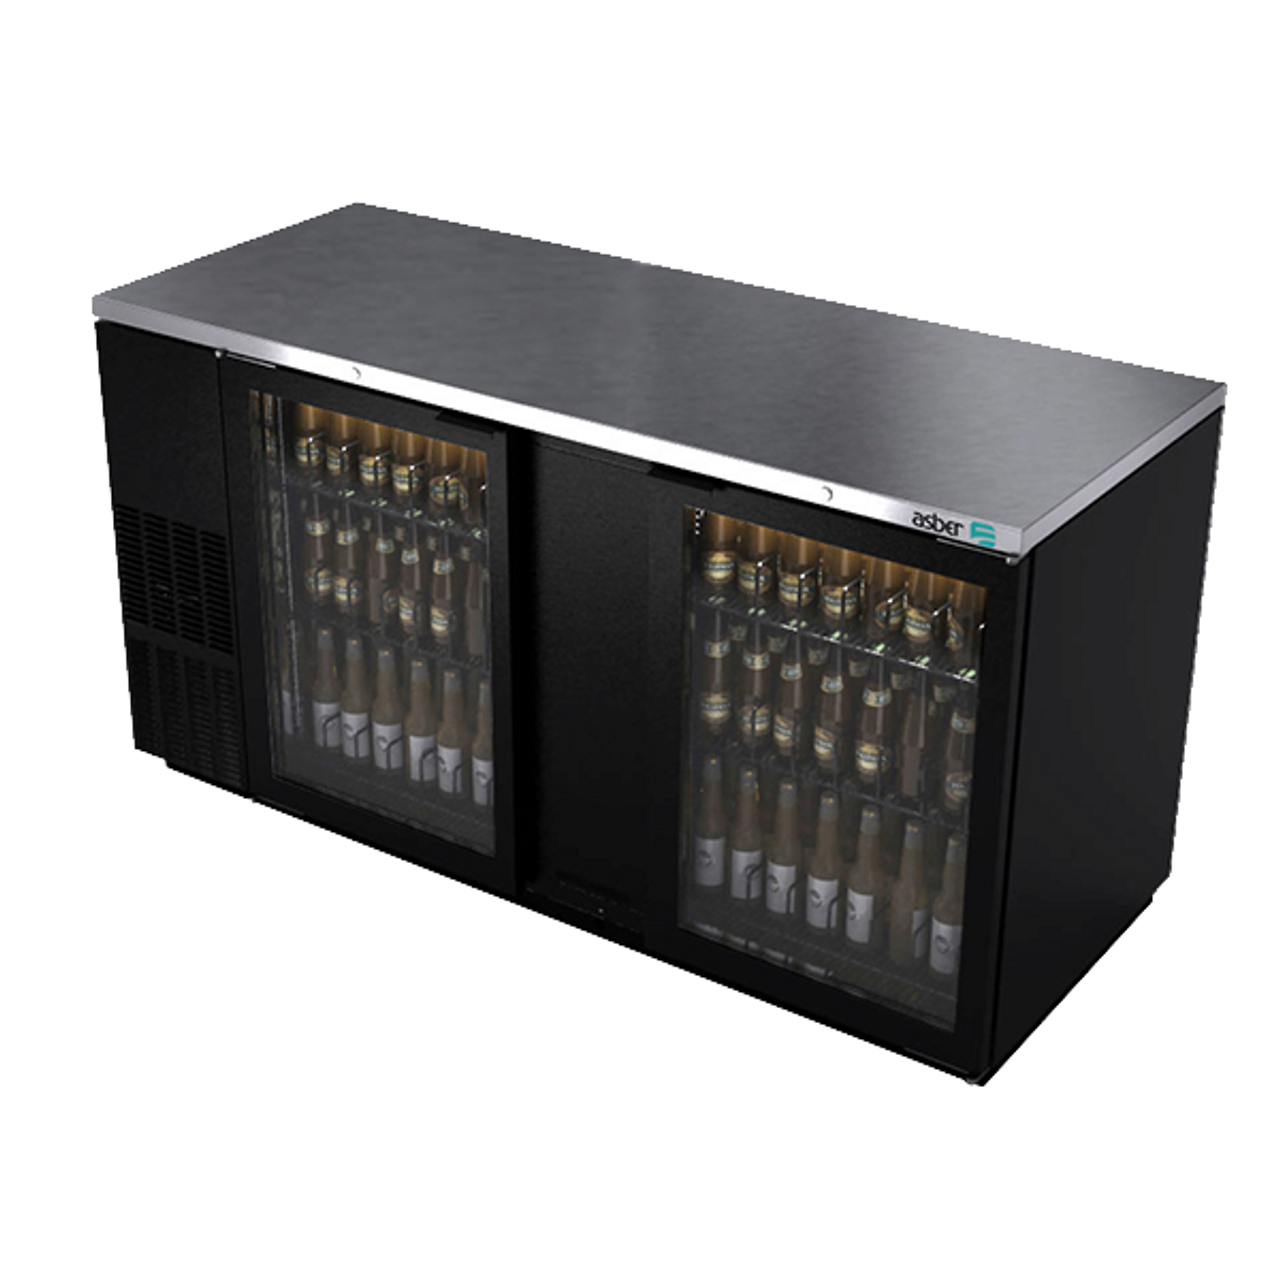 Back Bar Cooler, 69-1/2", two-section, (2) glass doors, (1,014) 12 oz can capacity, (4) adjustable coated wire shelves, analog thermostat, fluorescent interior light, CFC polyurethane insulation, temperature from 33° to 38°, environmentally friendly R134A refrigerant, front breathing/side mount compressor, self-contained refrigeration, magnetic door gasket, stainless steel top, black vinyl exterior, galvanized interior with stainless steel floor, 1/3 HP, cETLus, ETL-Sanitation, Made in North America